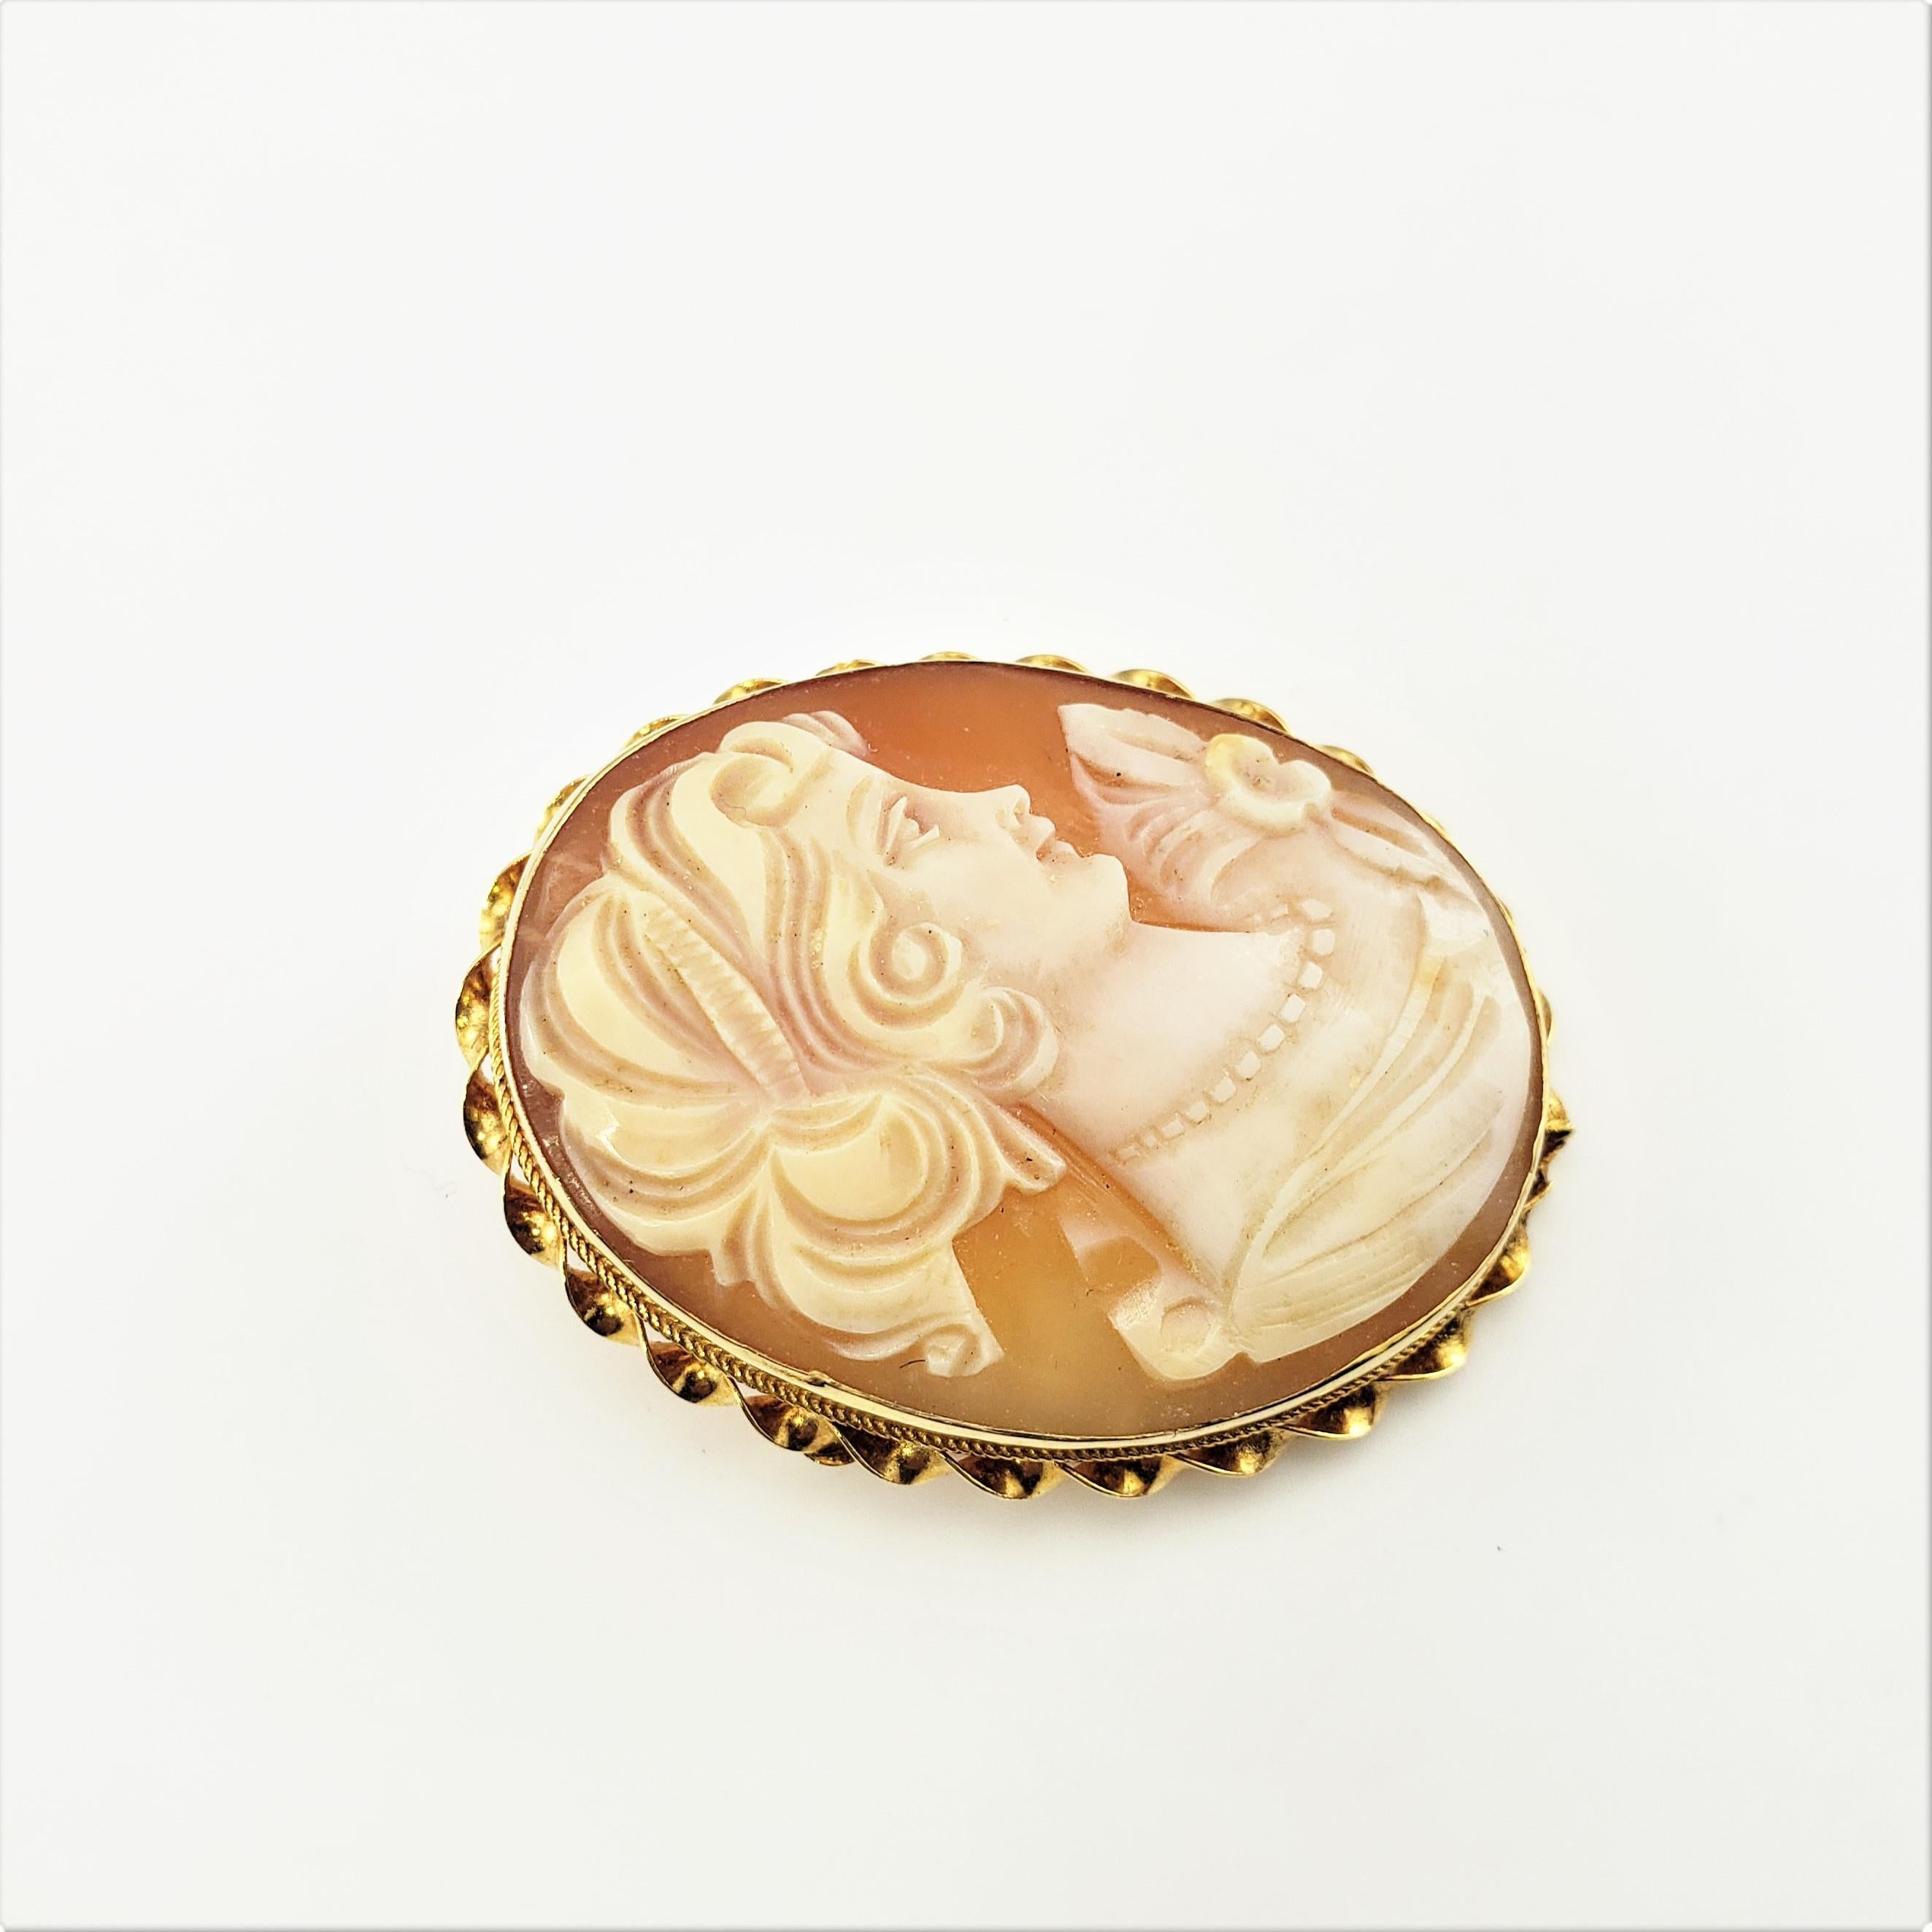 14 Karat Yellow Gold Cameo Brooch/Pendant-

This lovely cameo features a lovely lady in profile framed in beautifully detailed 14K yellow gold.  Can be worn as a brooch or a pendant.

Size: 38 mm x 30 mm

Weight:  3.9 dwt. /  6.2 gr.

Stamped: